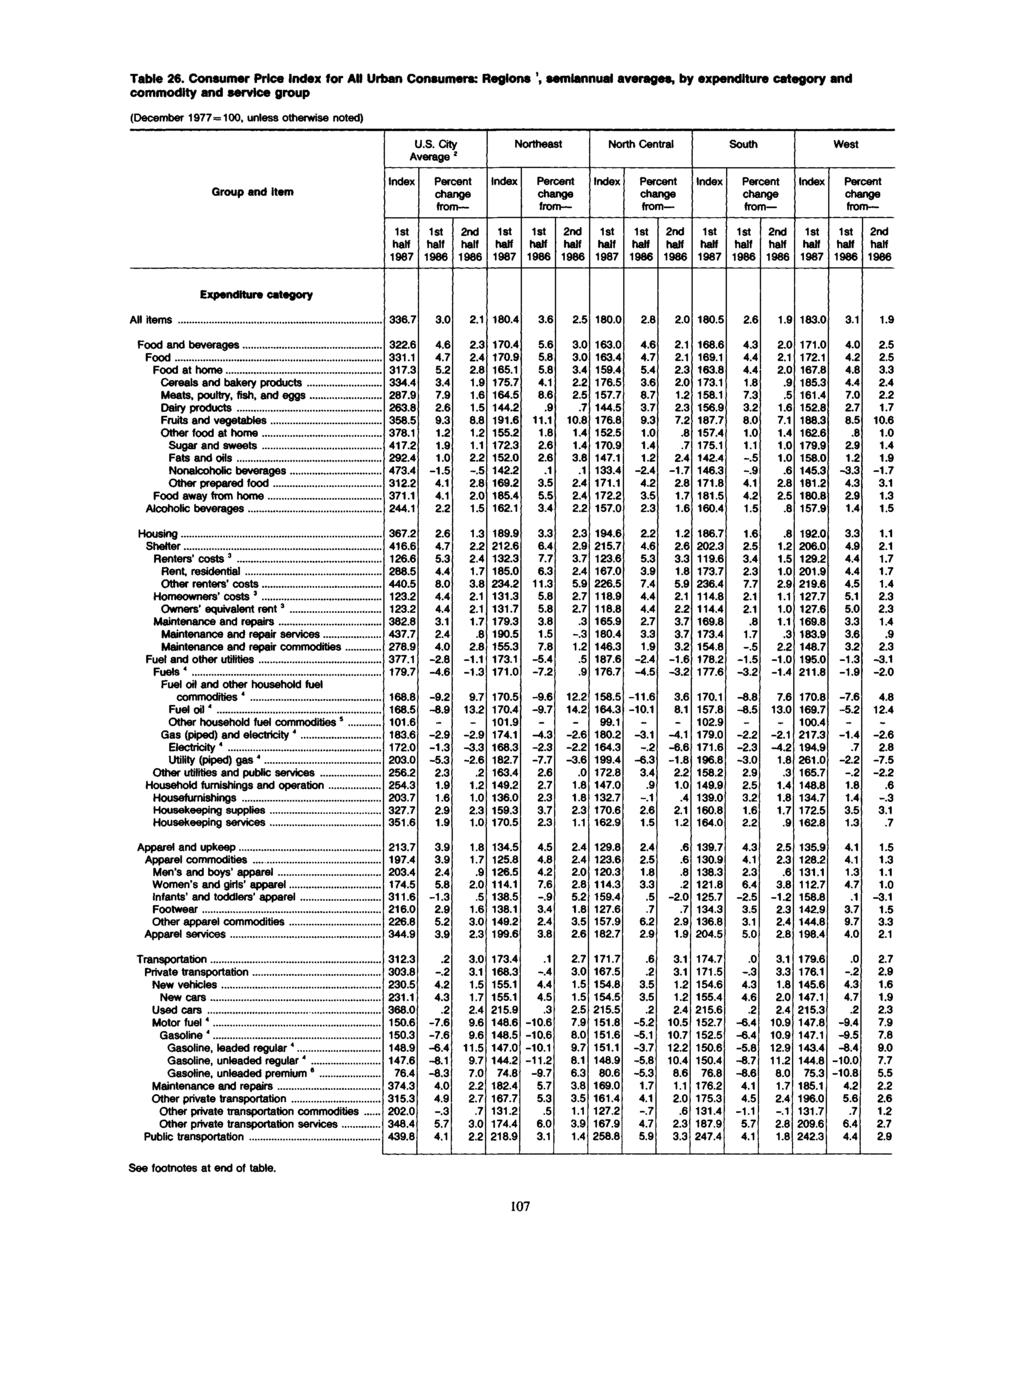 Table 26. Consumer Price for All Urban Consumers: Regions ', semiannual averages, by expenditure category and commodity and service group (December 1977=100, unless otherwise noted) U.S.